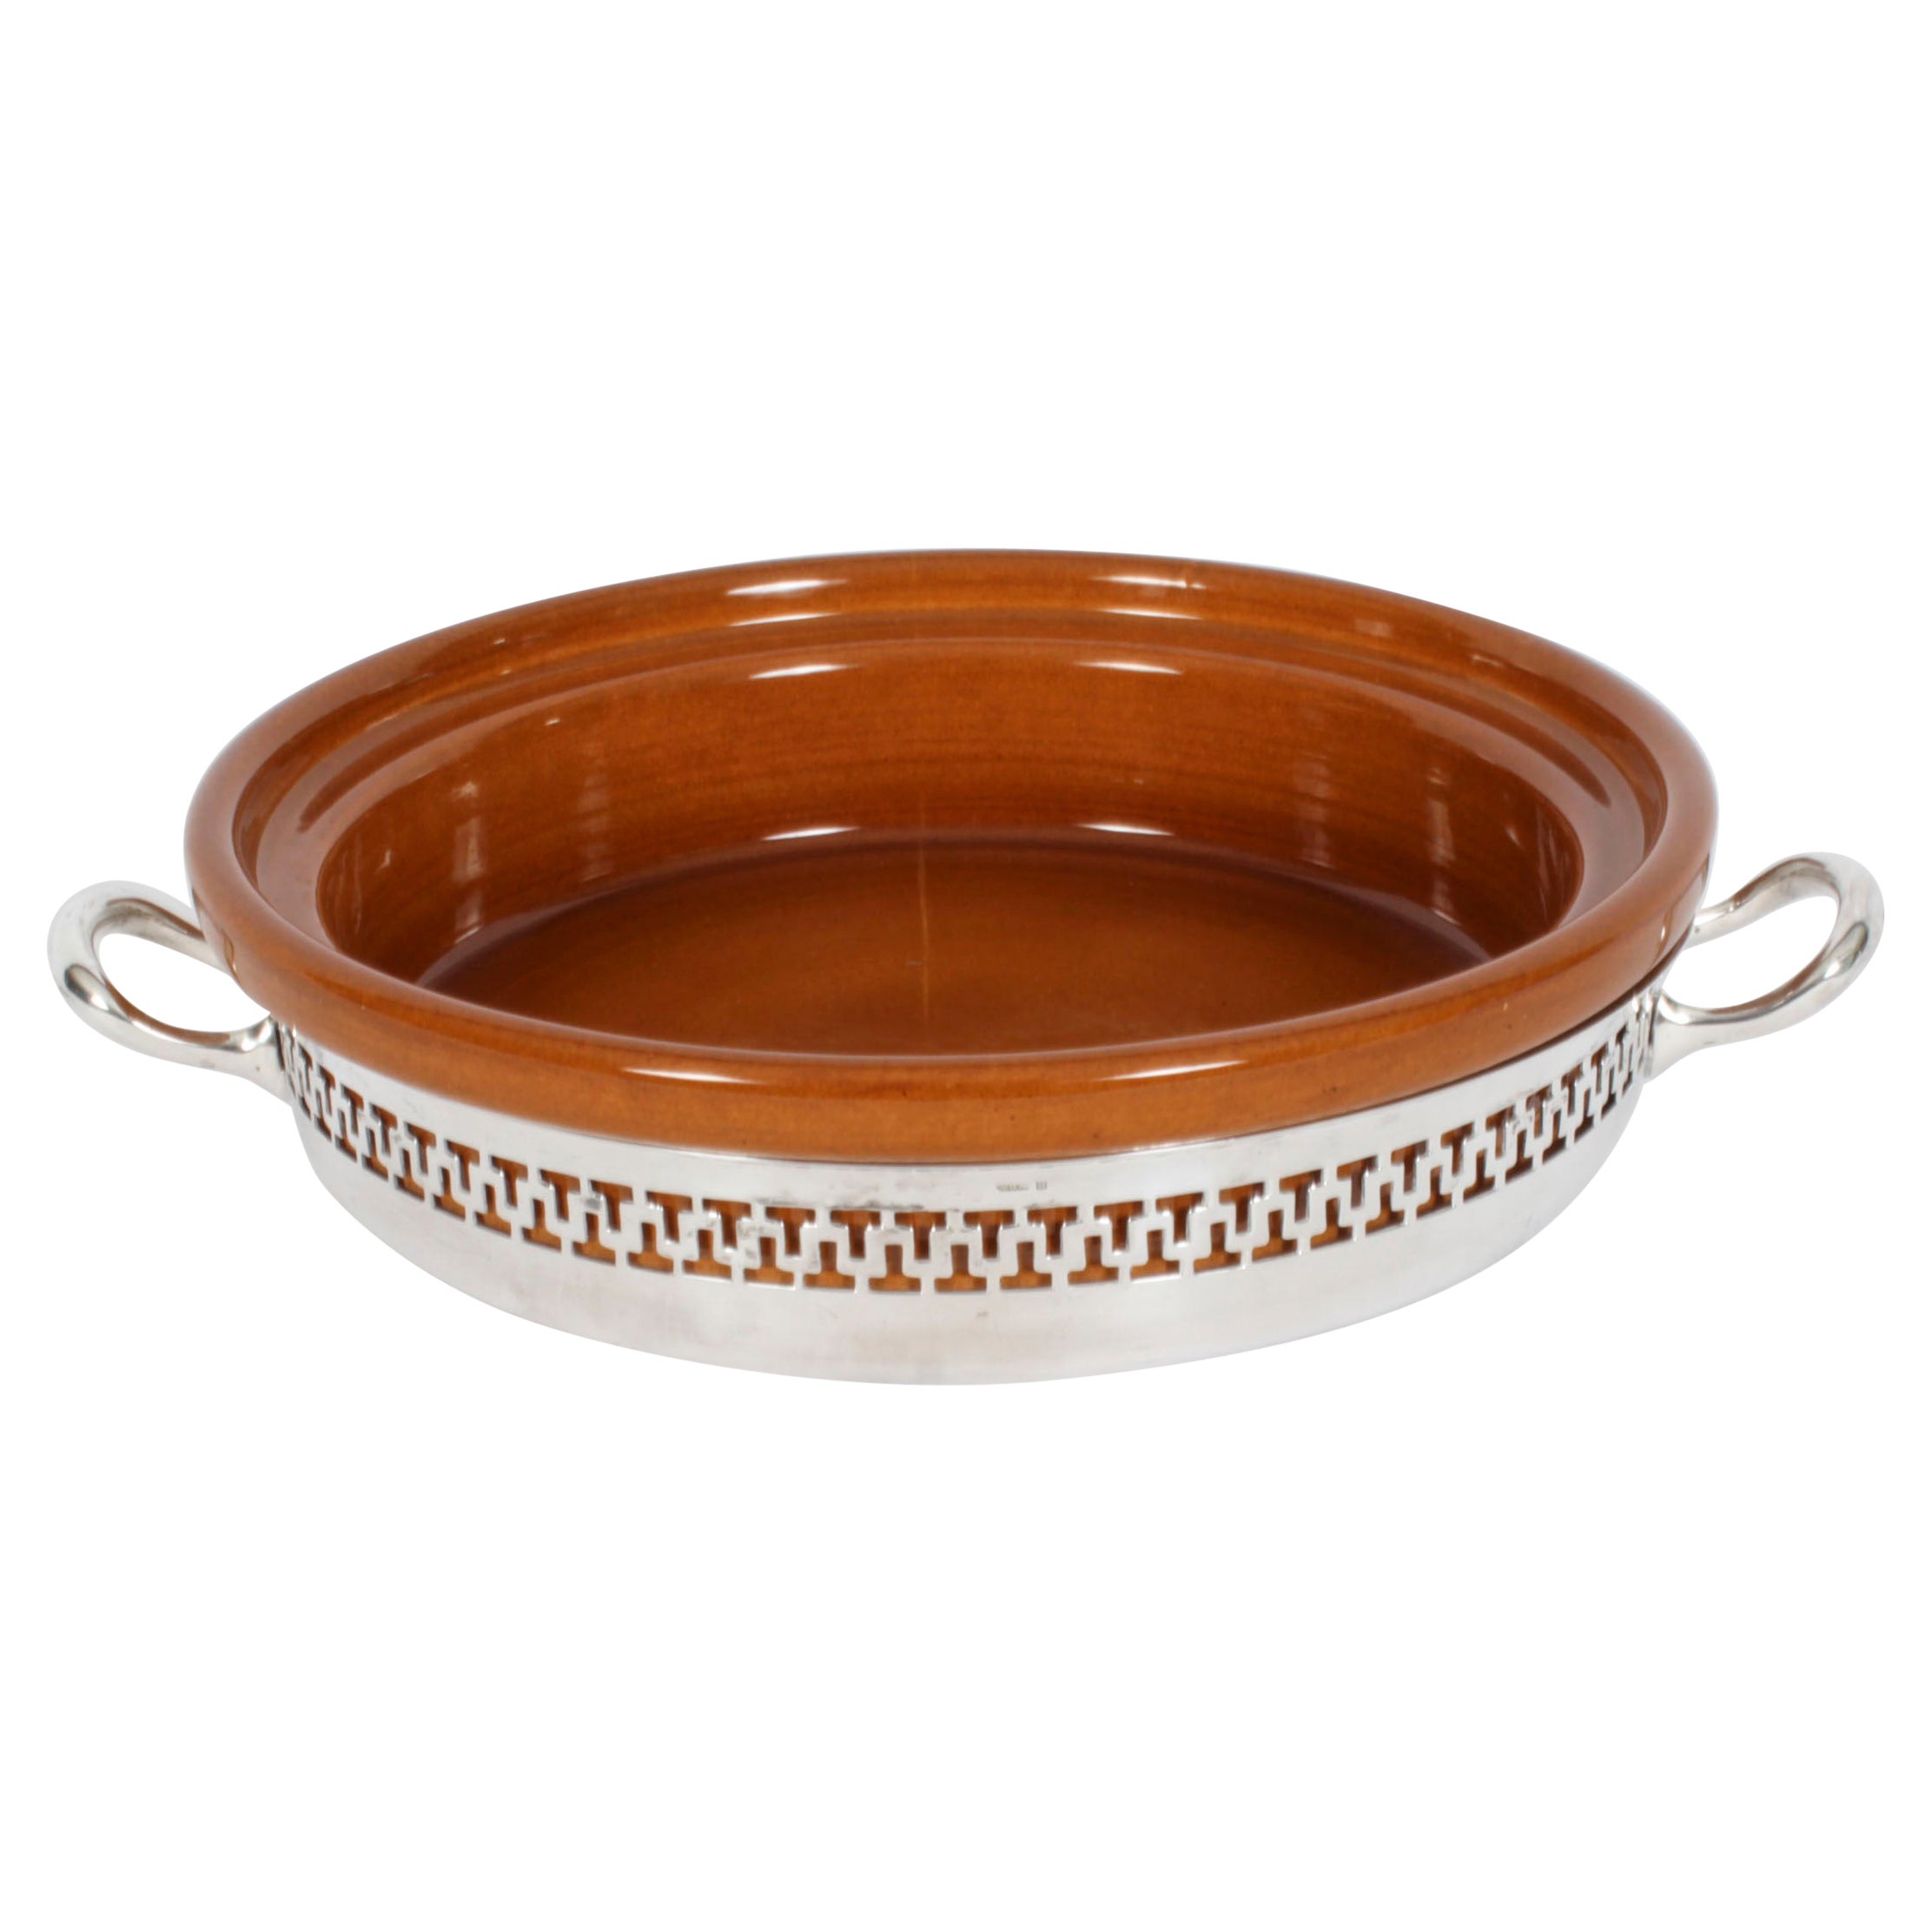 Antique Silver Plate and Terracotta Serving Dish by Wiskemann, 1920s